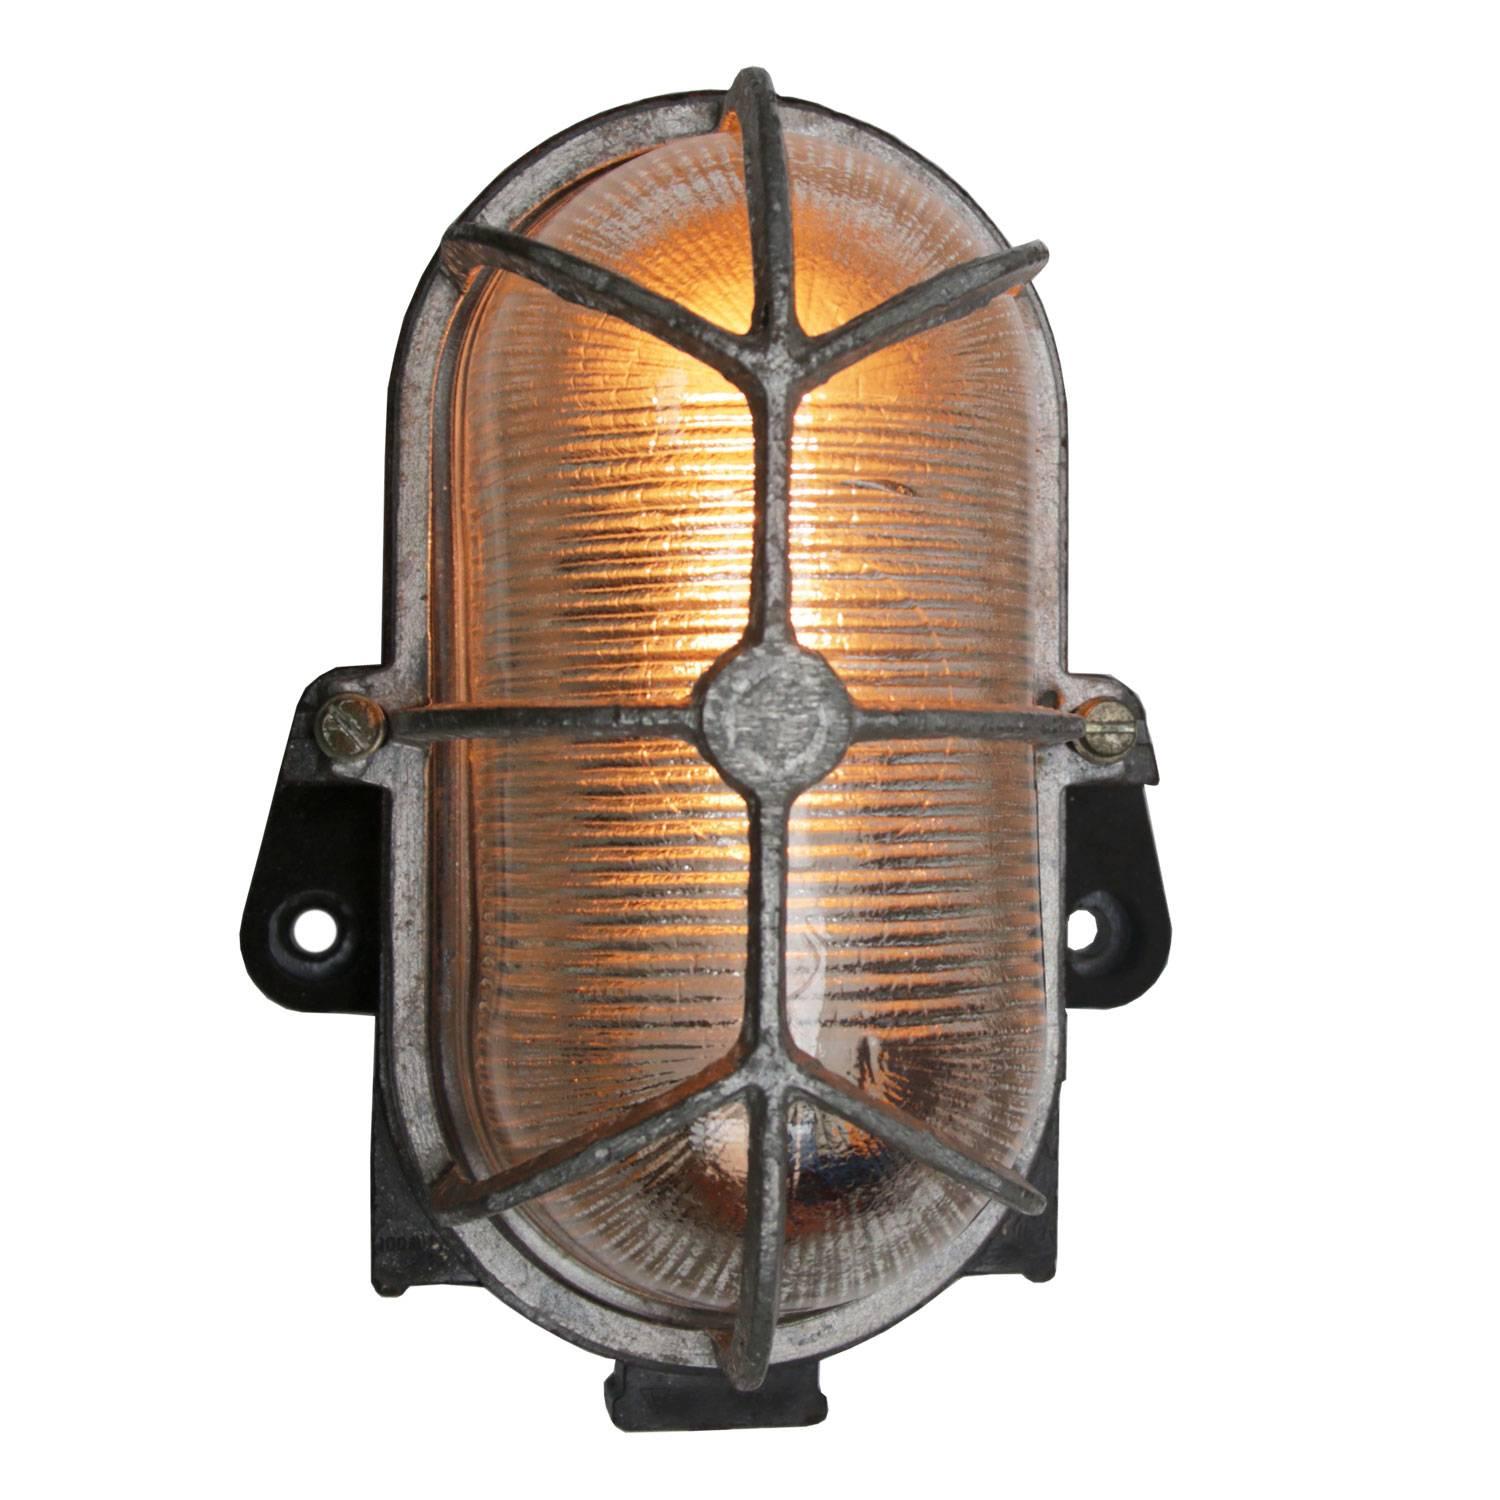 Industrial wall and ceiling scone. Bakelite back. Holophane striped glass.
Aluminium frame.

Weight: 0.8 kg / 1.8 lb

Priced individual item. All lamps have been made suitable by international standards for incandescent light bulbs, energy-efficient